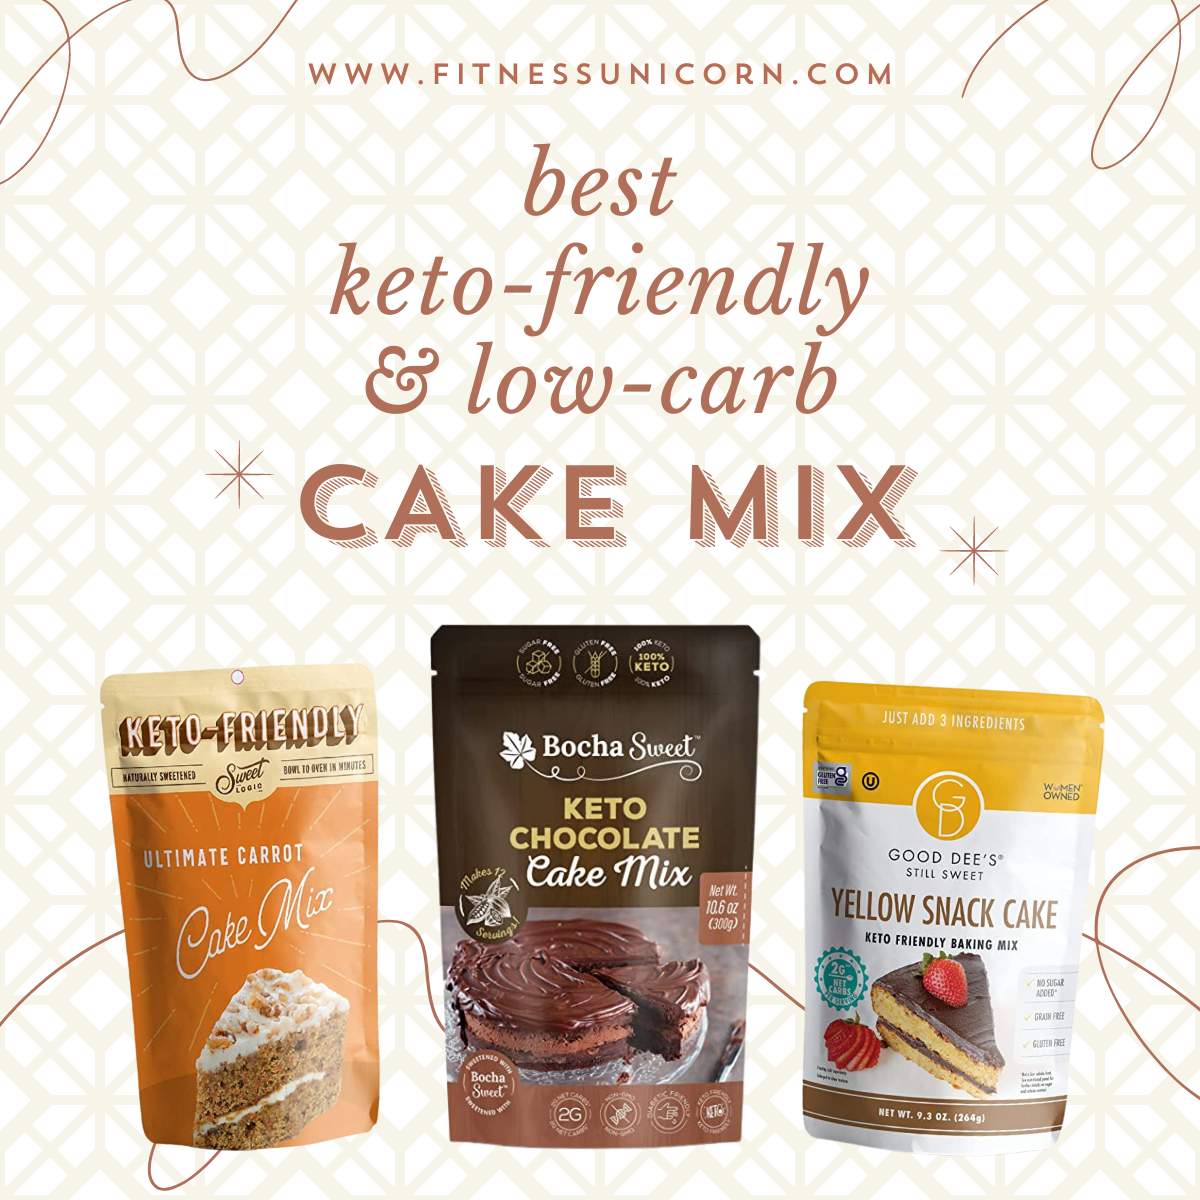 Best Keto-Friendly and Low-Carb Cake Mix